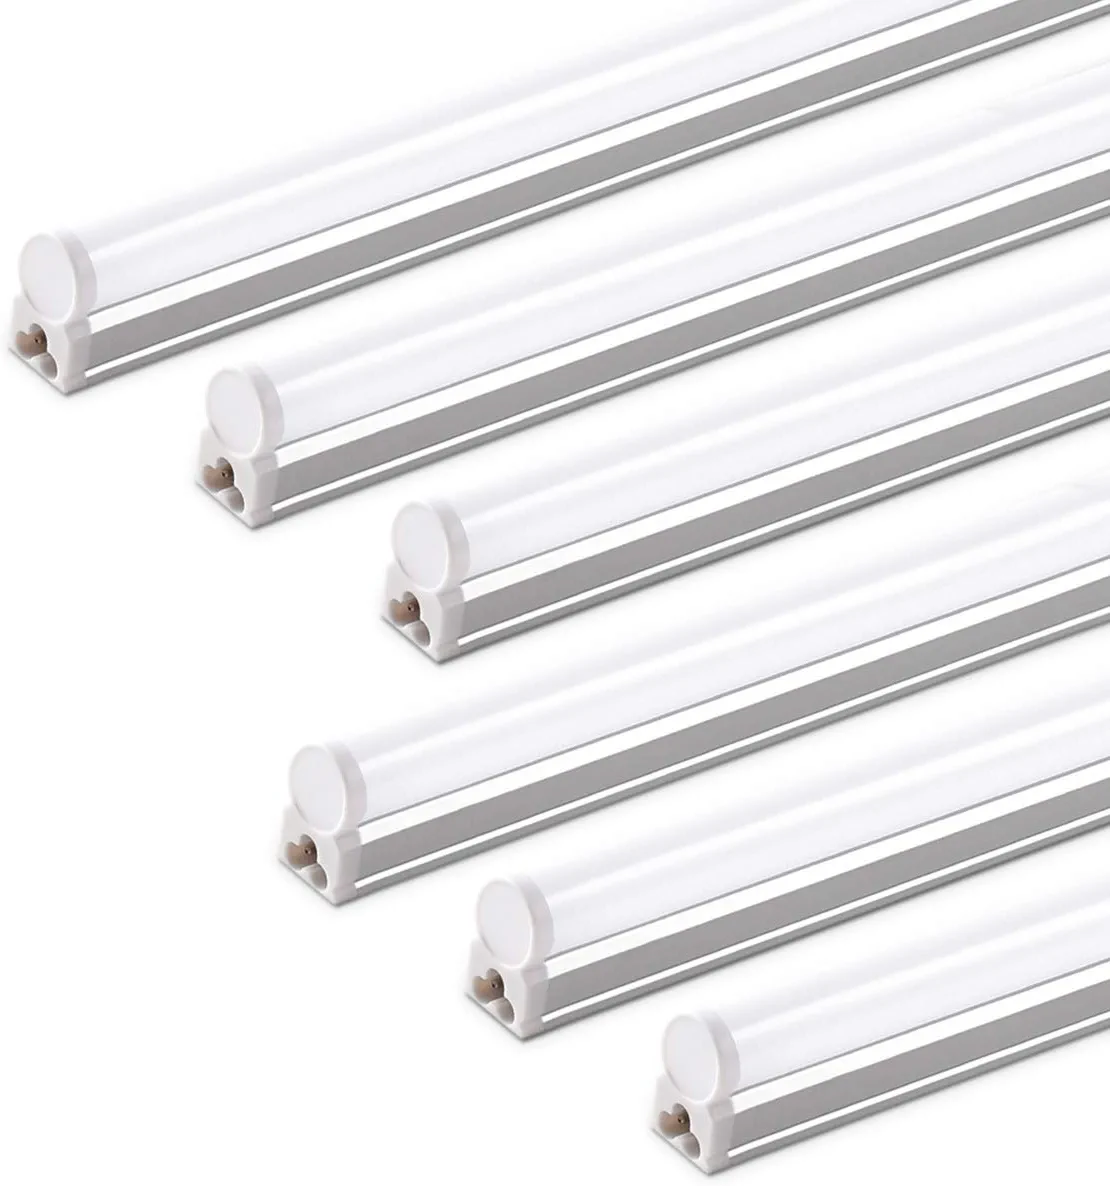 Photo 1 of (6 Pack) Barrina LED T5 Integrated Single Fixture, 4FT, 2200lm, 6500K (Super Bright White), 20W, Utility LED Shop Light, Ceiling and Under Cabinet Light, Corded Electric with ON/OFF Switch, ETL Listed
